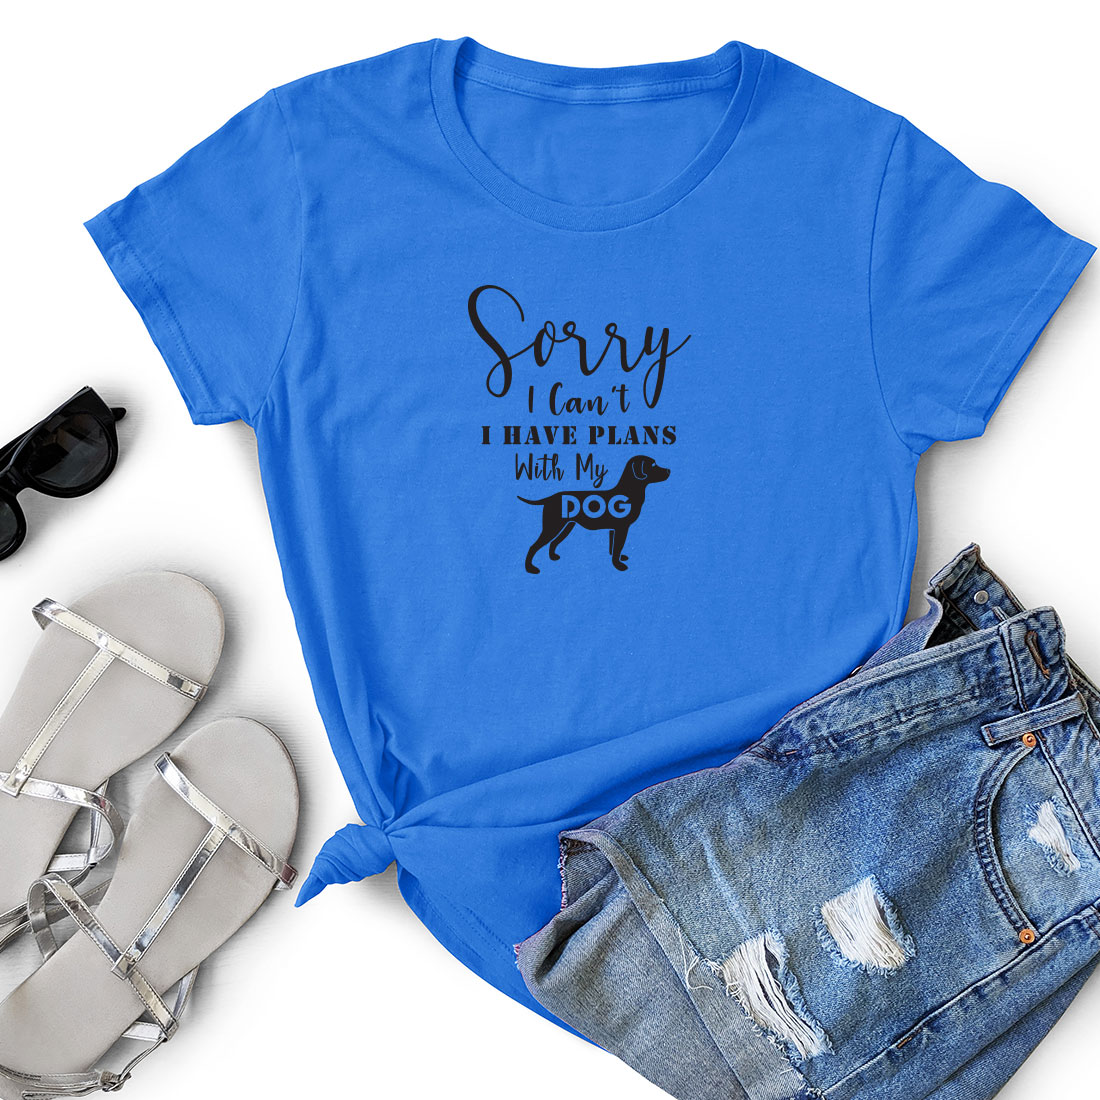 T - shirt that says sorry i don't have plans for dogs.